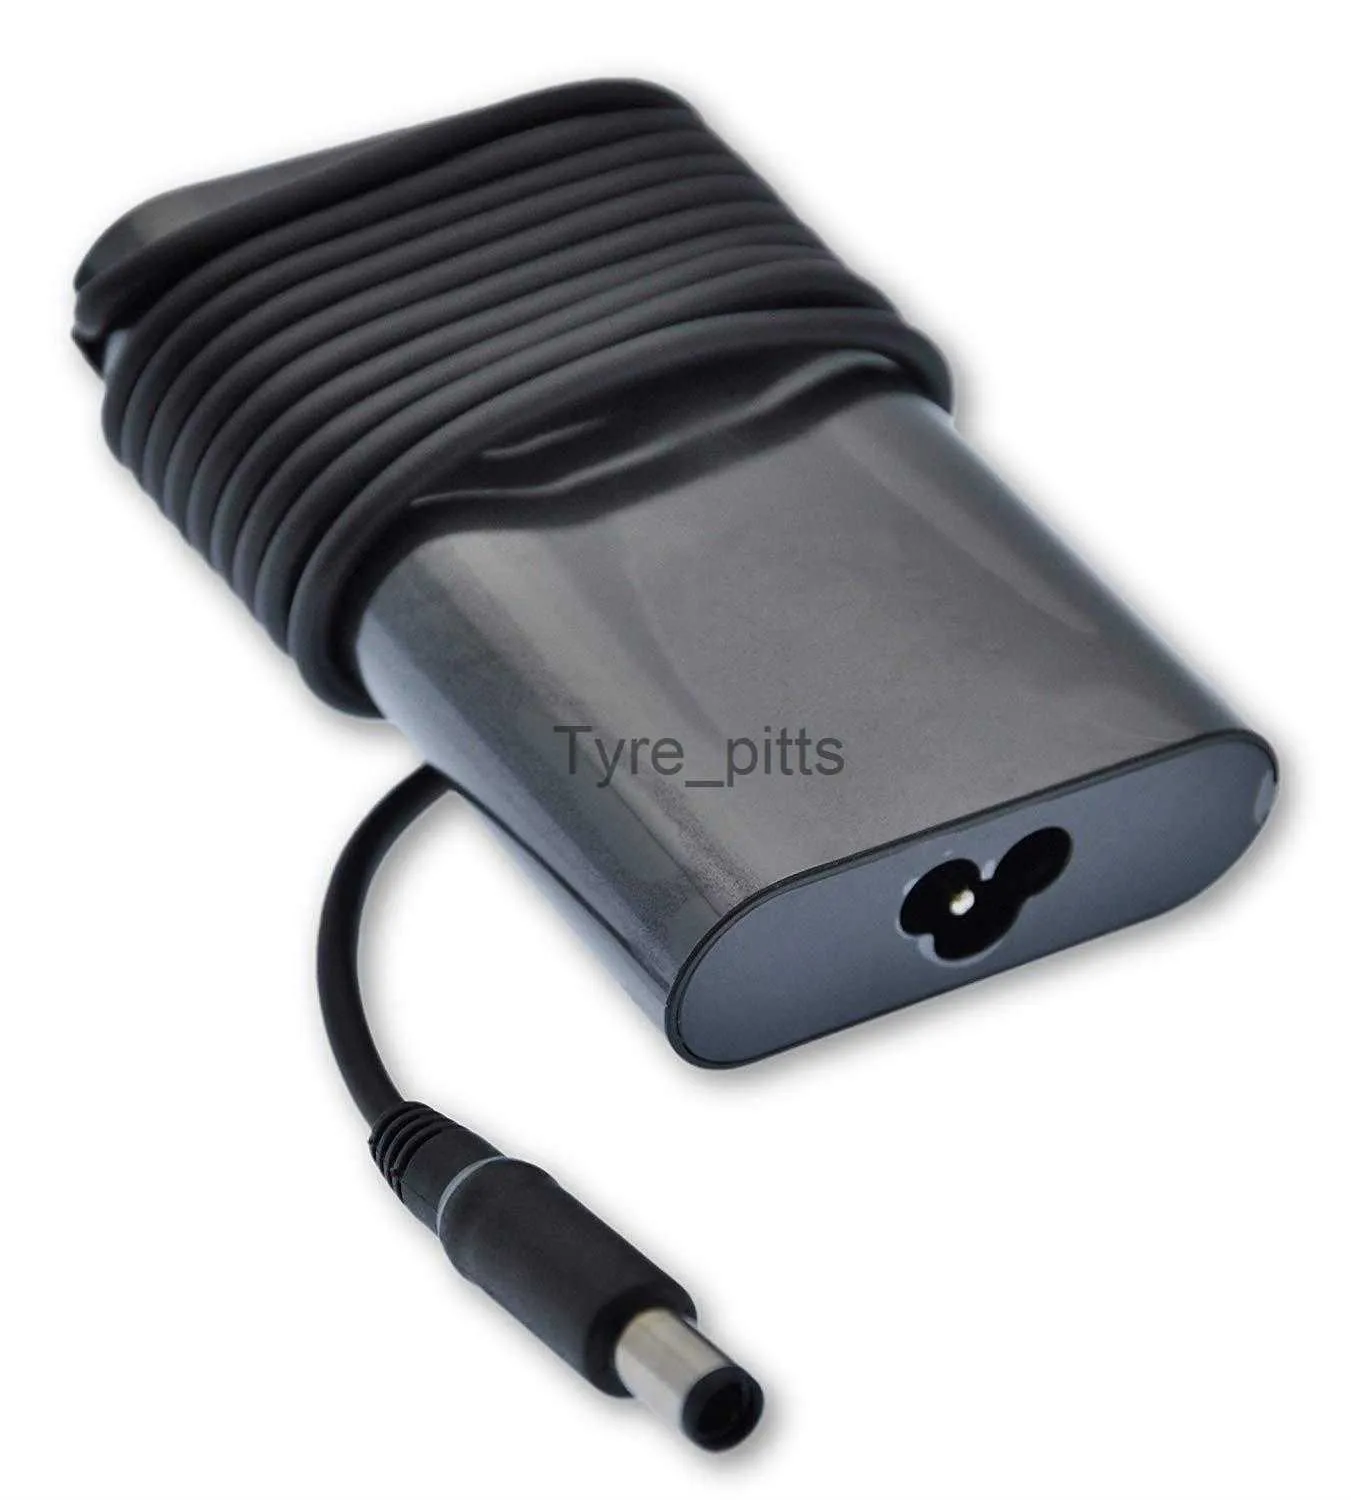 Chargers Laptop Charger 65W AC Power Adapter Fit for Dell Latitude 5280 5290 5480 5580 5590 5490 5495 7280 7290 7380 7390 7480 7490 E7440 x0729